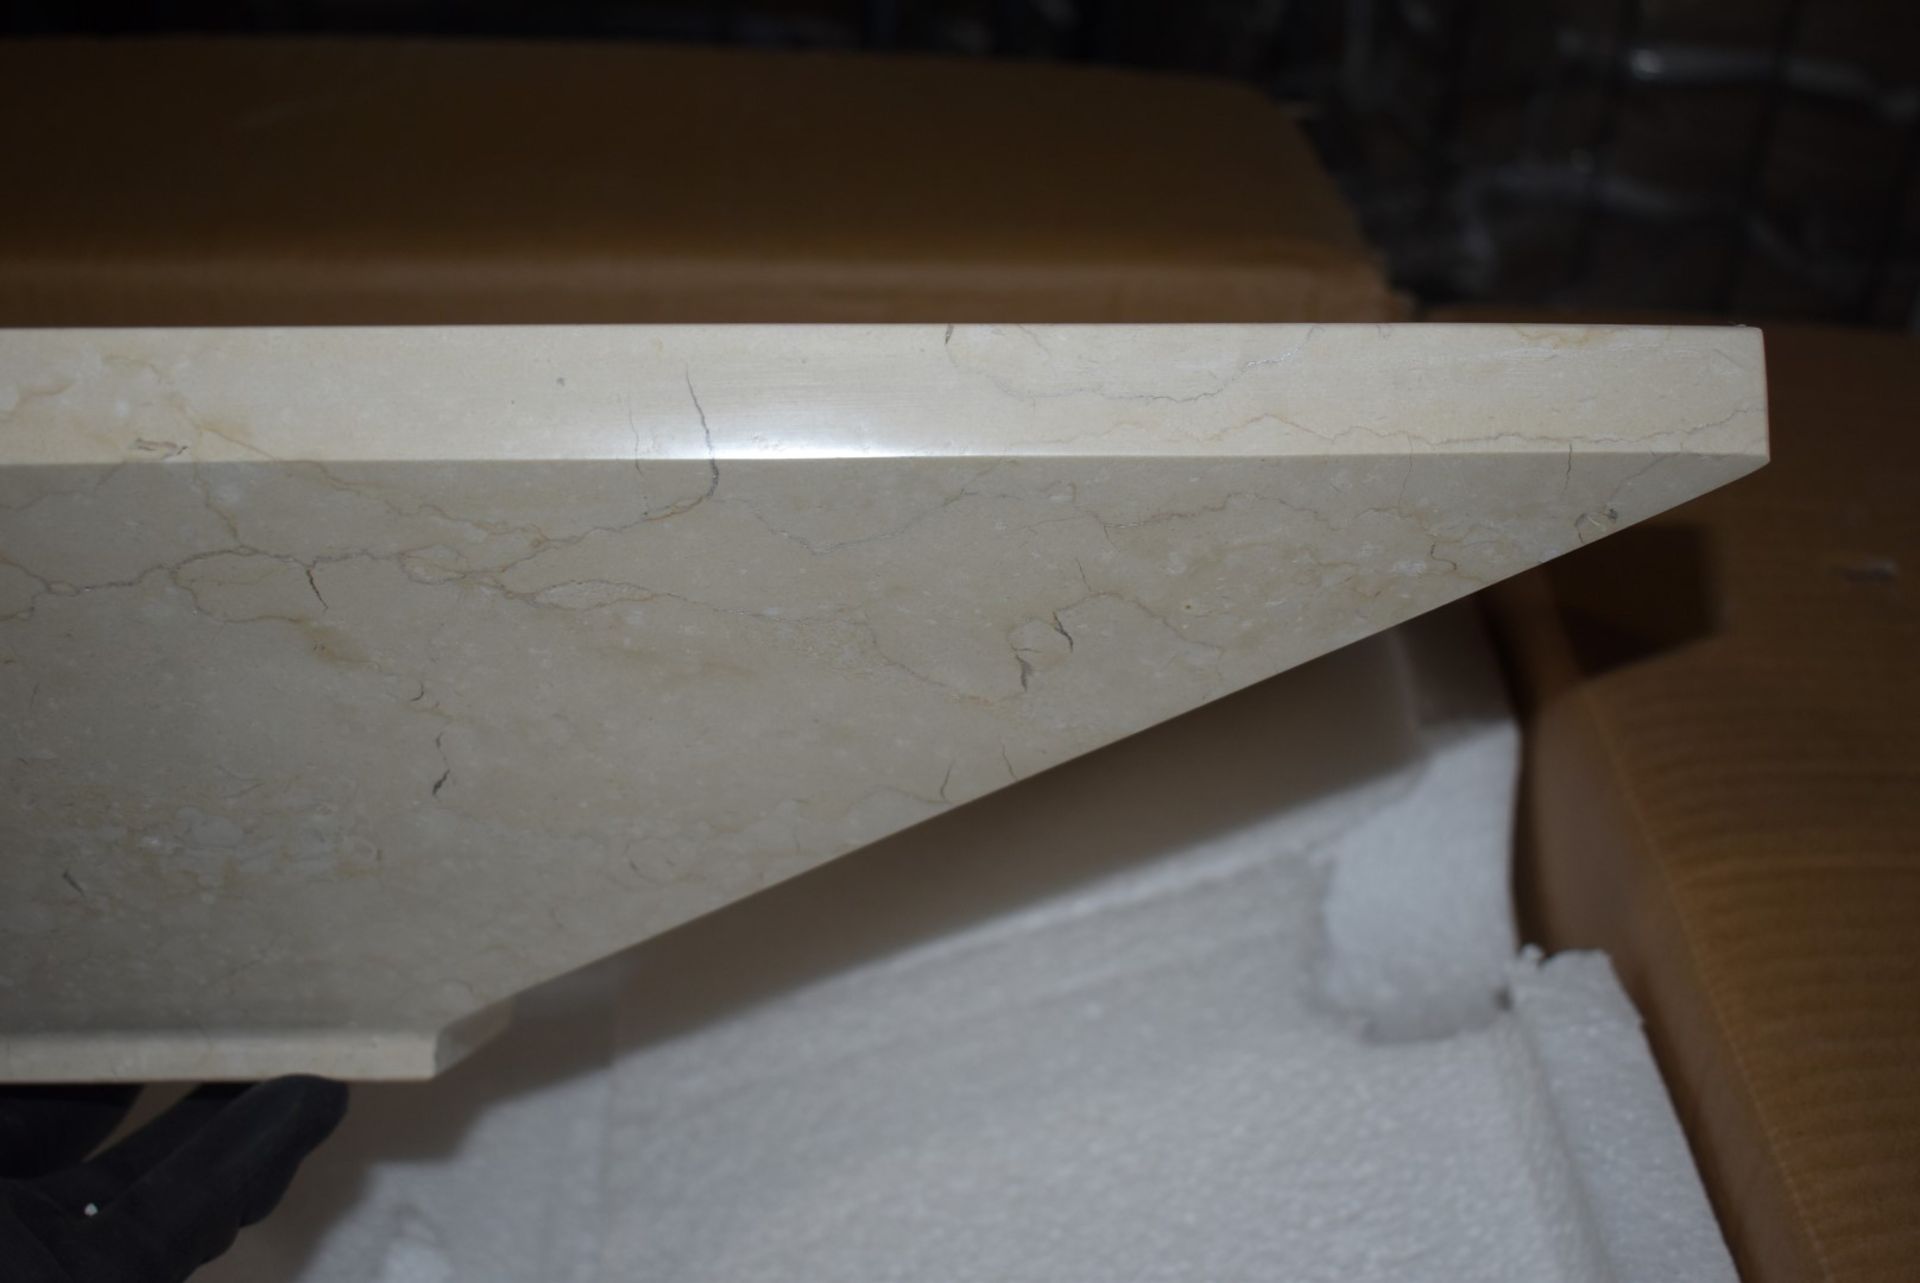 1 x Stonearth 'Karo' Solid Galala Marble Stone Countertop Sink Basin - New Boxed Stock - RRP £ - Image 4 of 8